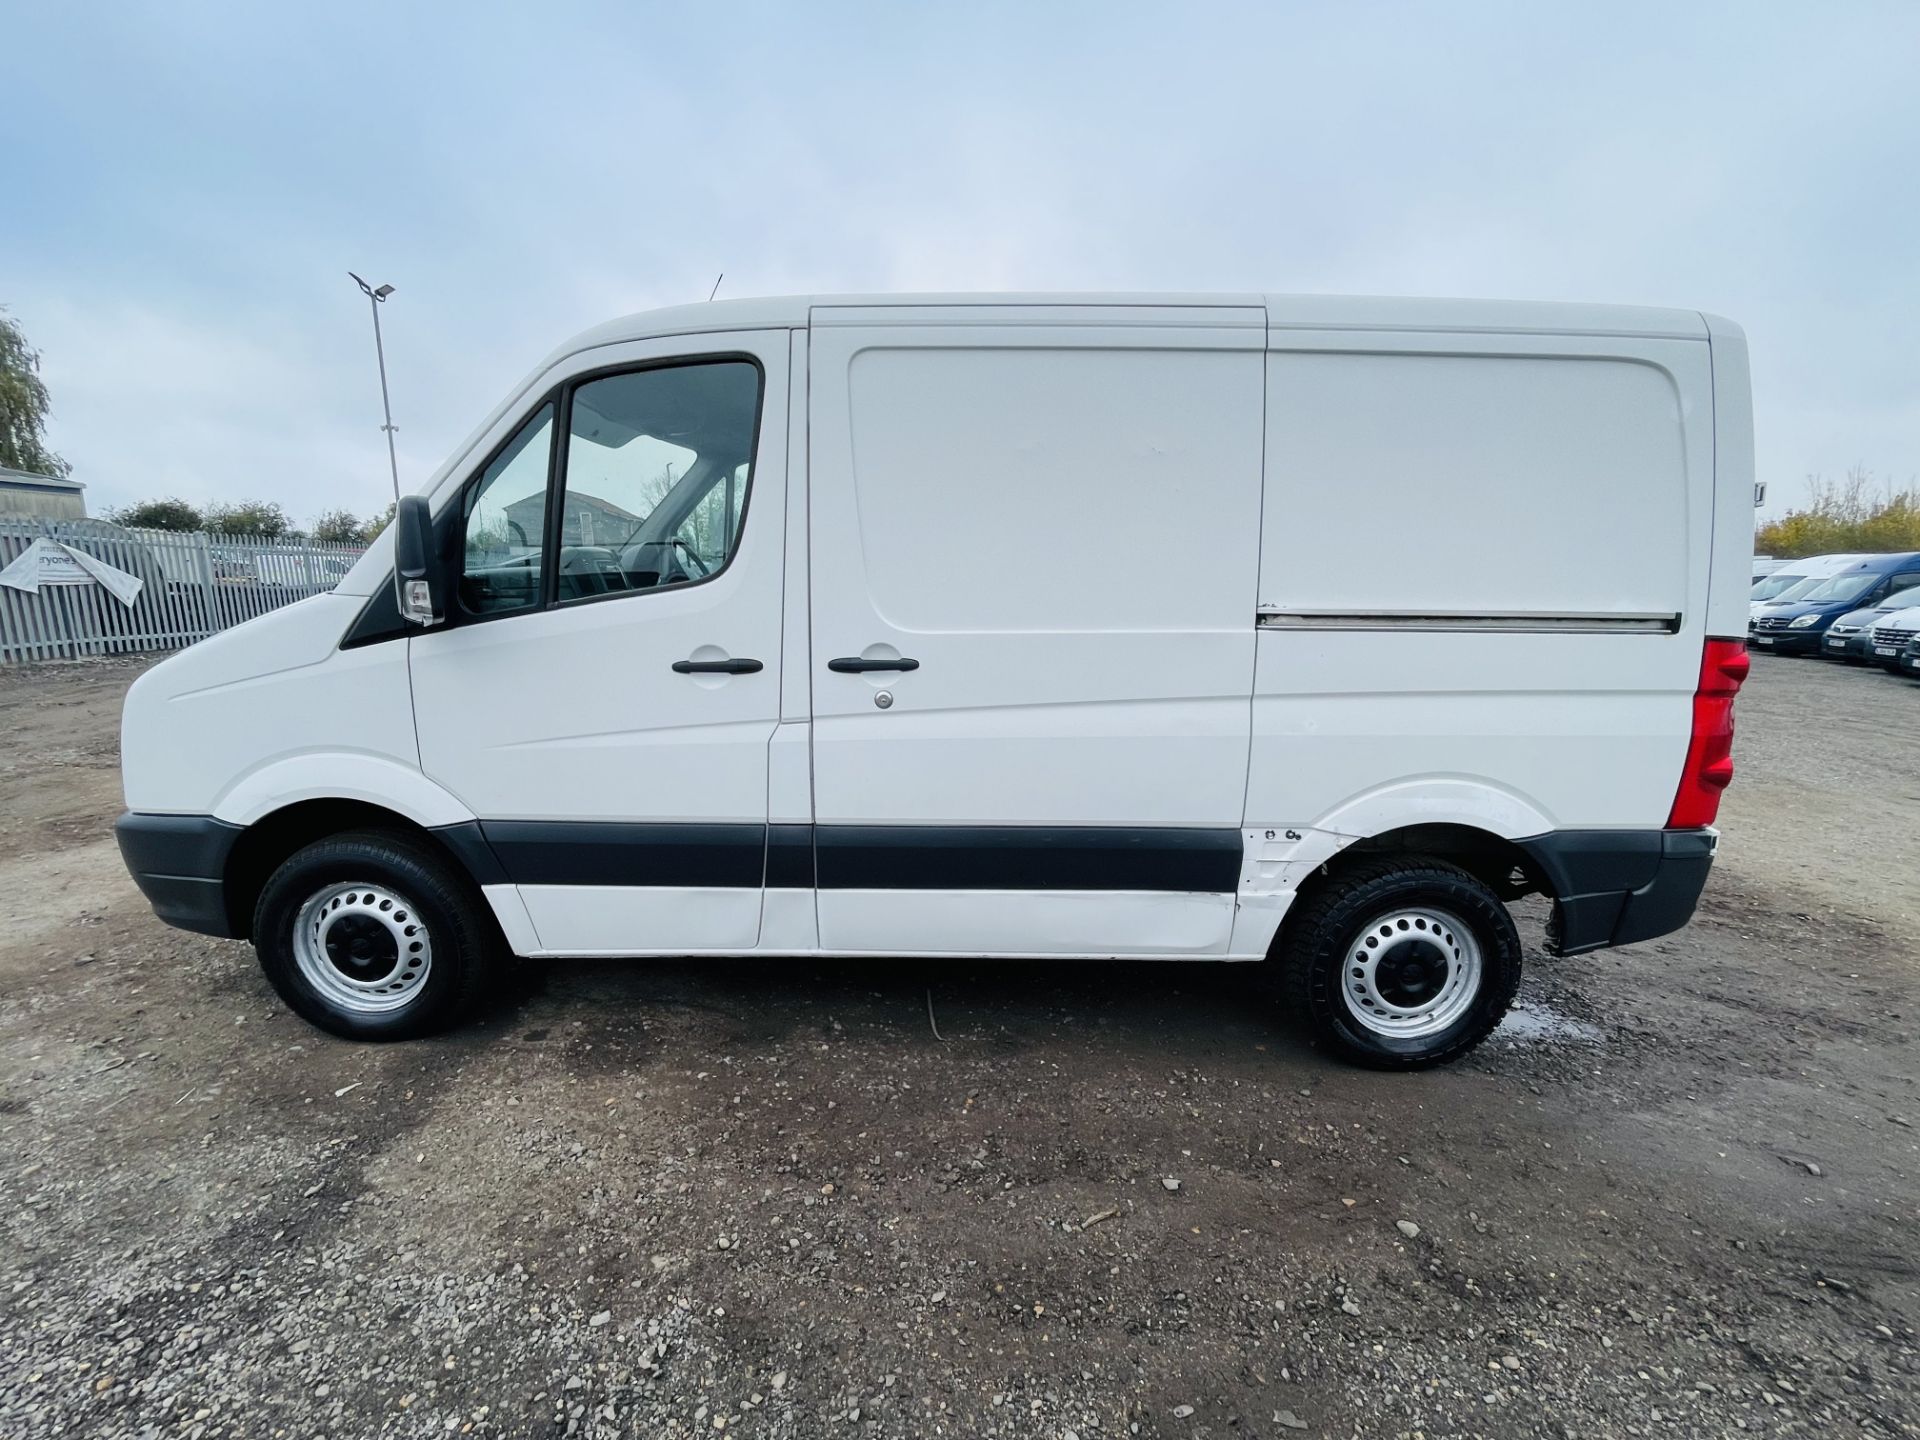 Volkswagen Crafter CR30 2.0 TDI 109 L1 H1 2012 ' 62 Reg' - Air Con - No Vat Save 20% - Image 7 of 19